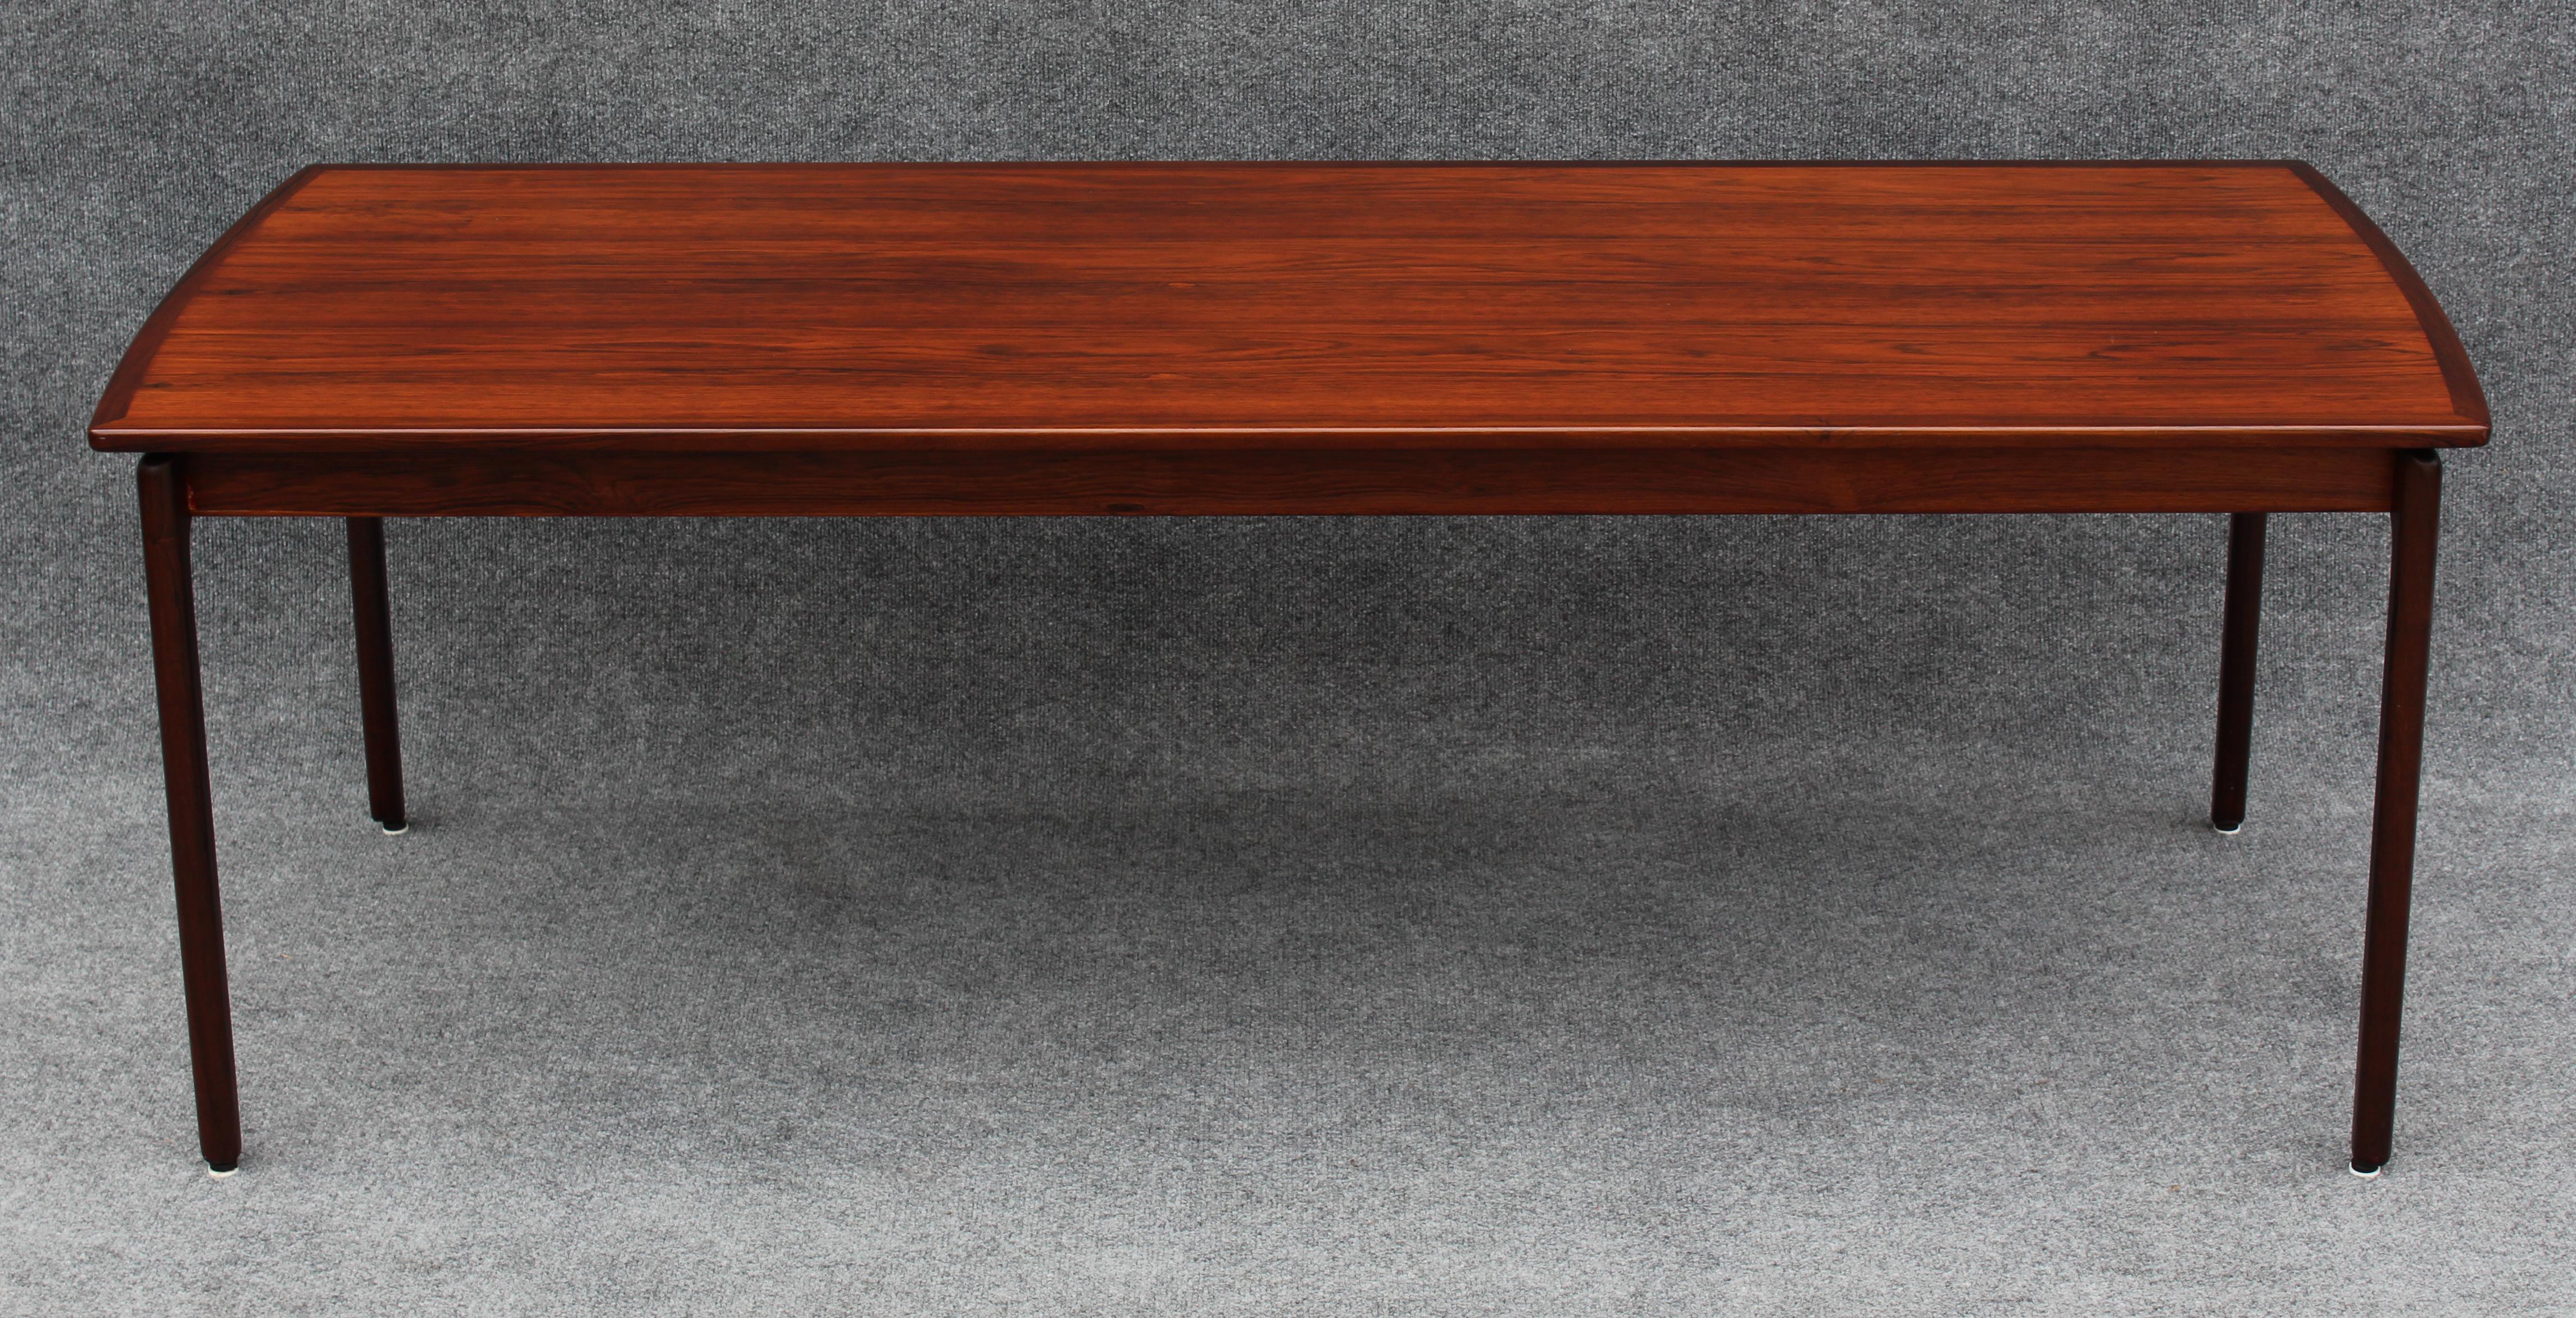 Designed in the 1960s by iconic designer Ole Wanscher, this high coffee table was produced by Poul Jeppesens Mobelfabrik. This example is not only the rare rosewood variant, but also one of the few ever imported into the US. Deisgned in such a way